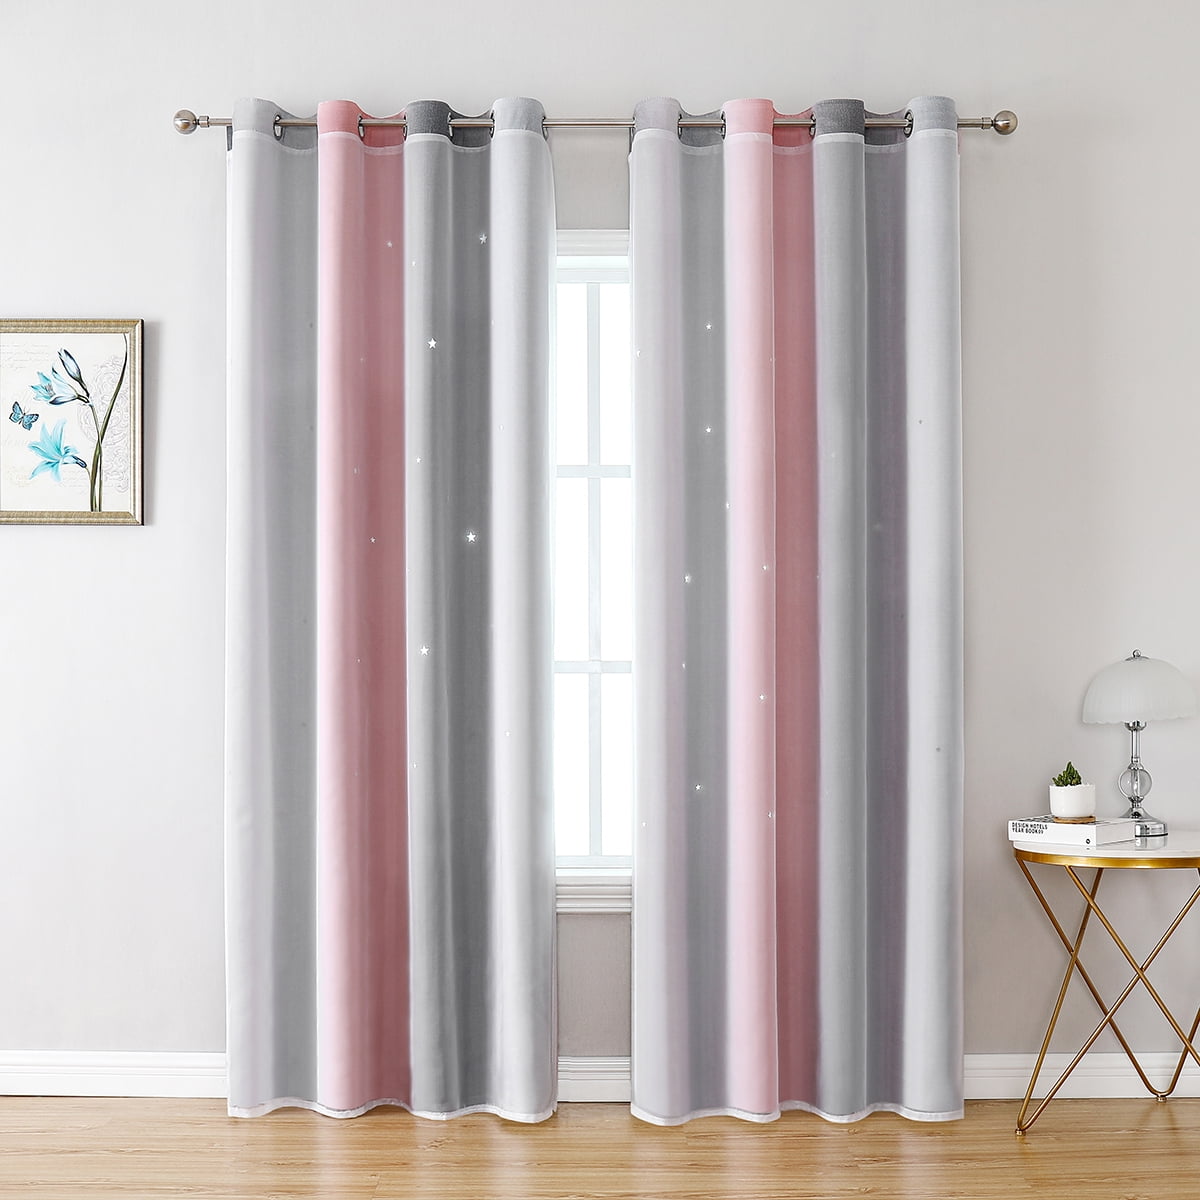 Details about   1/2/4 Panels Window Screening Tulle Drap Voile Valance Ombre Curtains Home Decor 